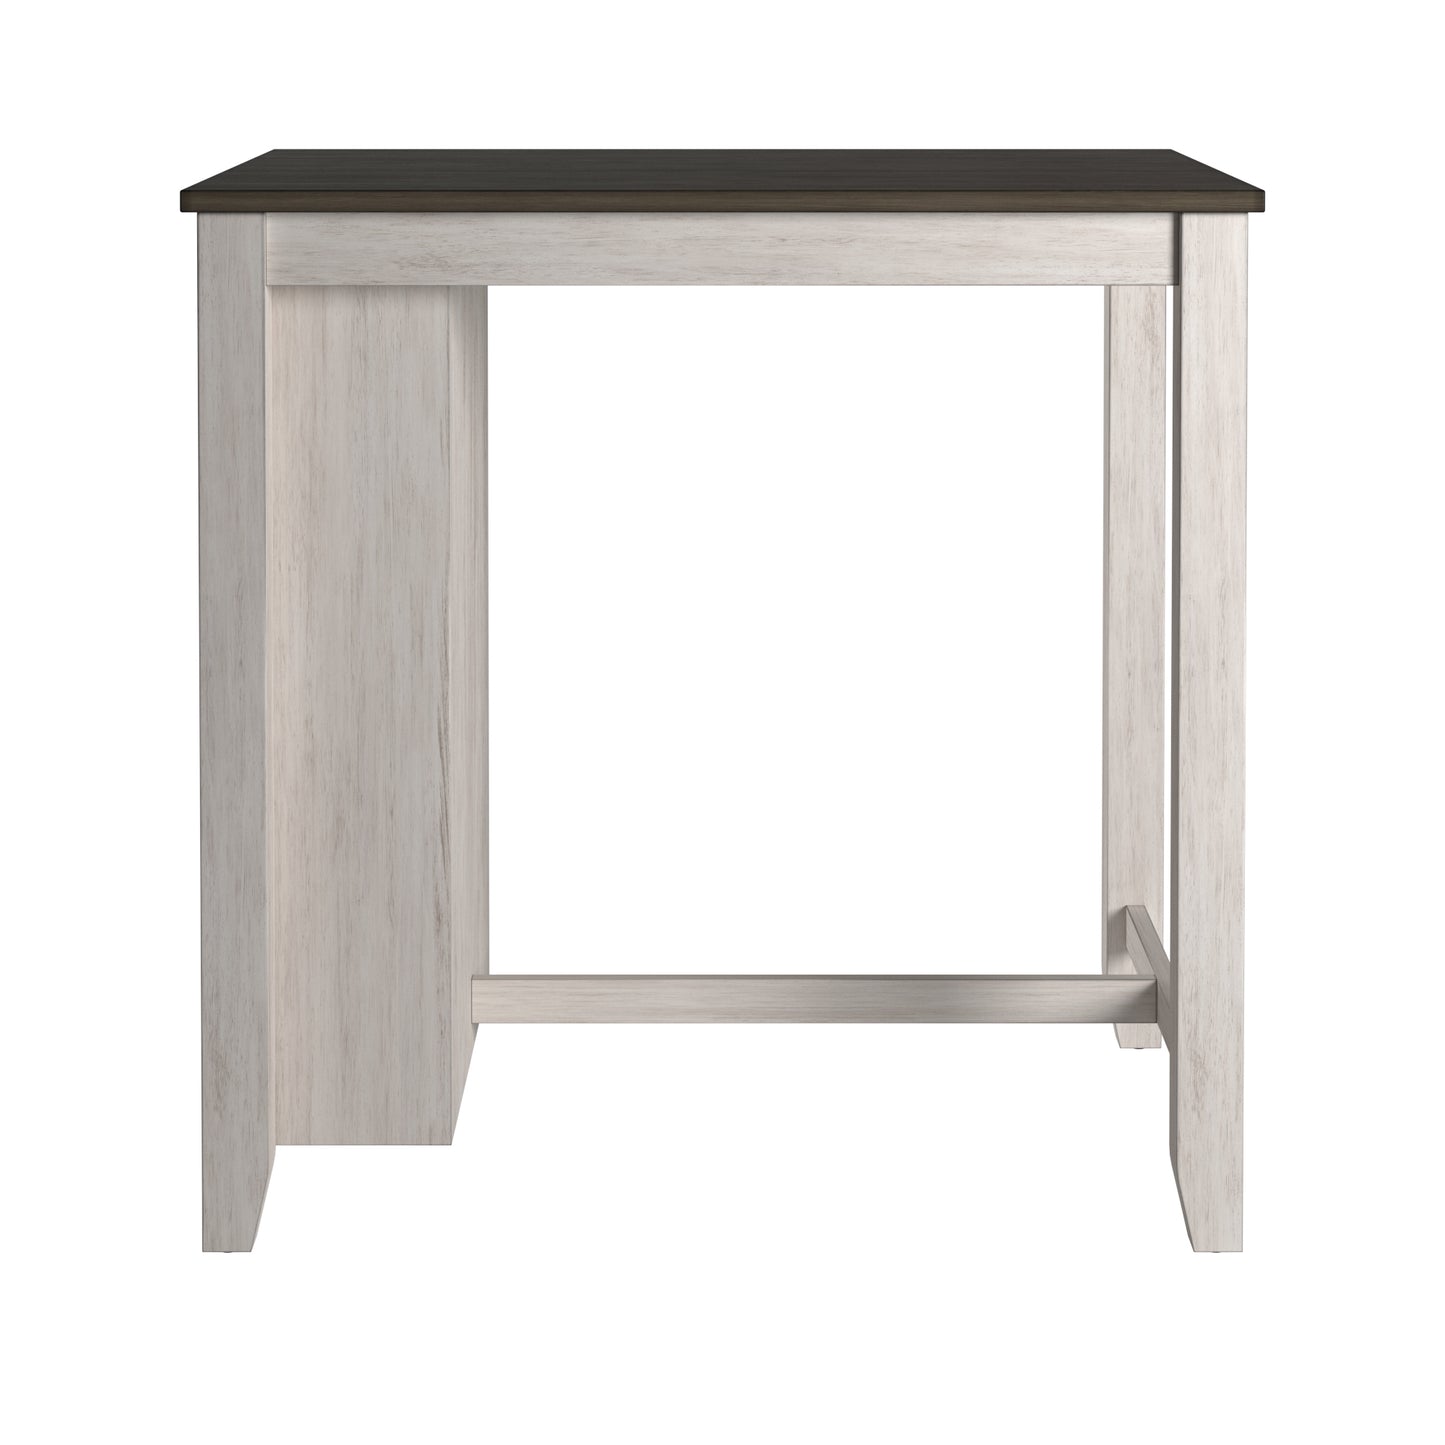 Wood Counter Height Dining Table with Charging Station - Dark Cherry Top and Two-Tone Grey & White Base Finish